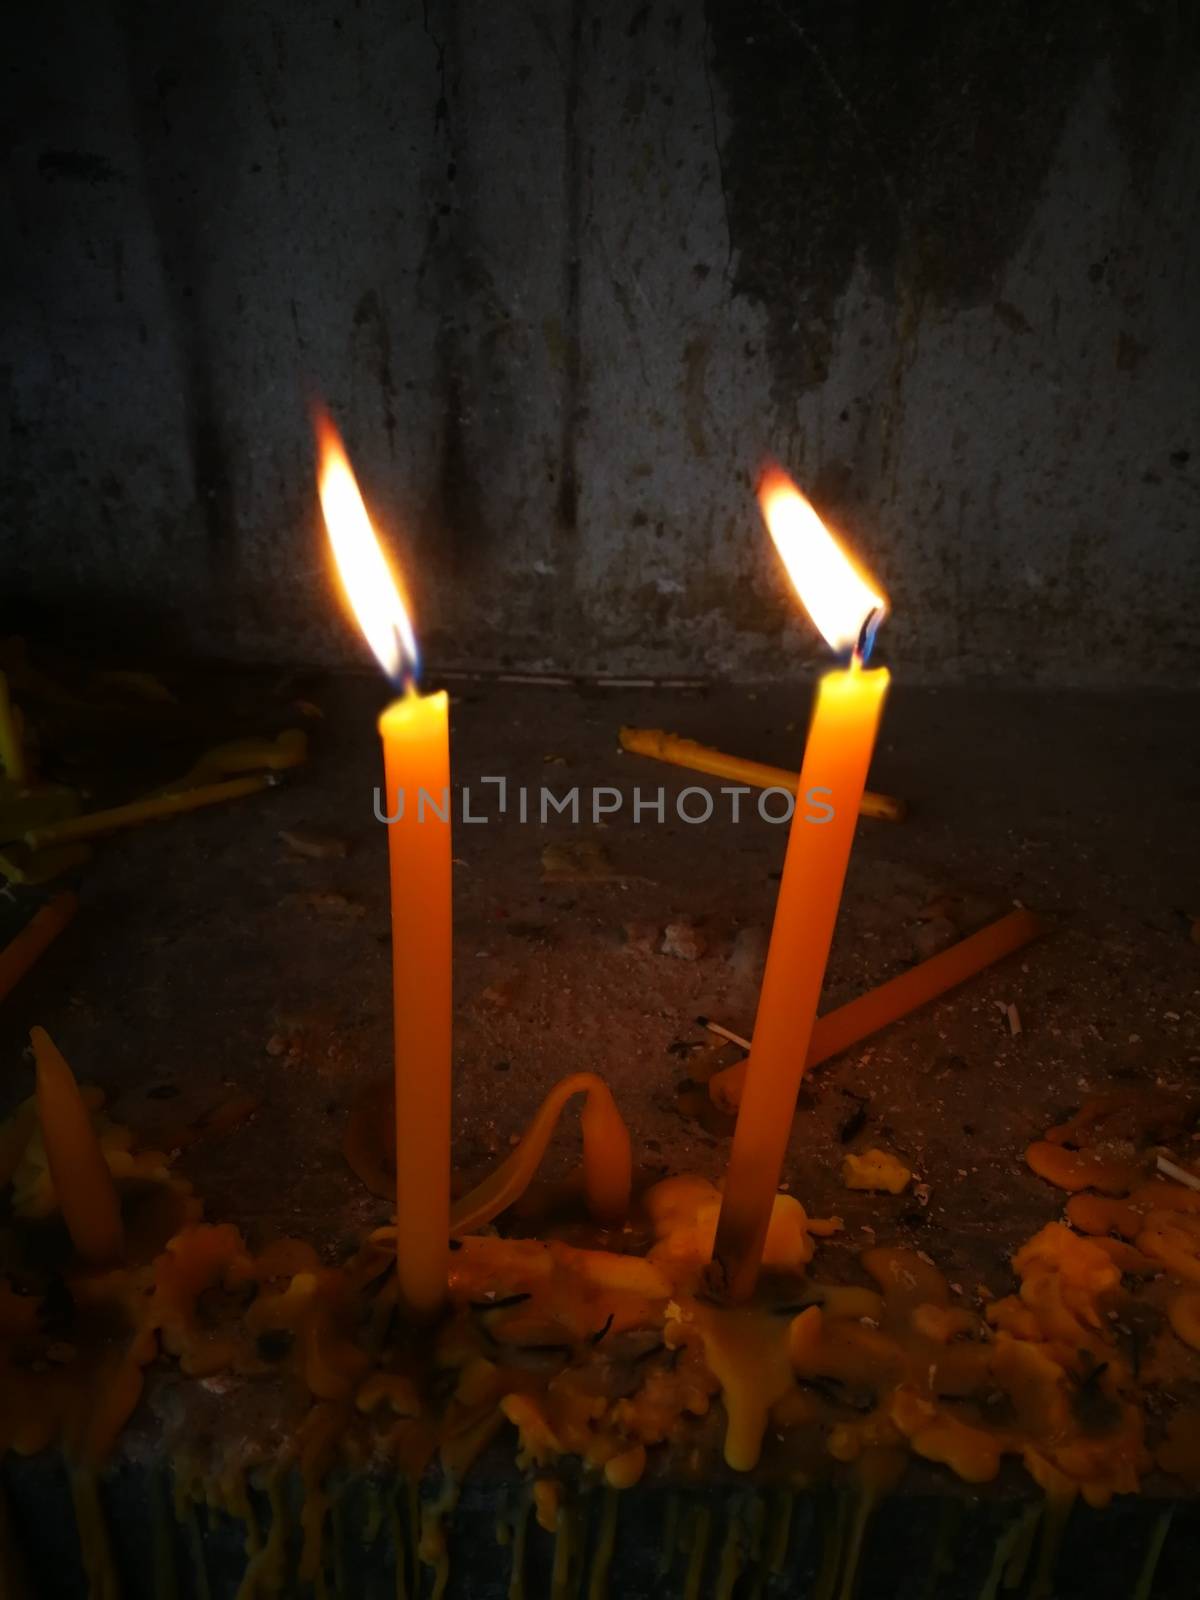 Incense and candlelight for worship from Buddhist in Thailand Te by shatchaya